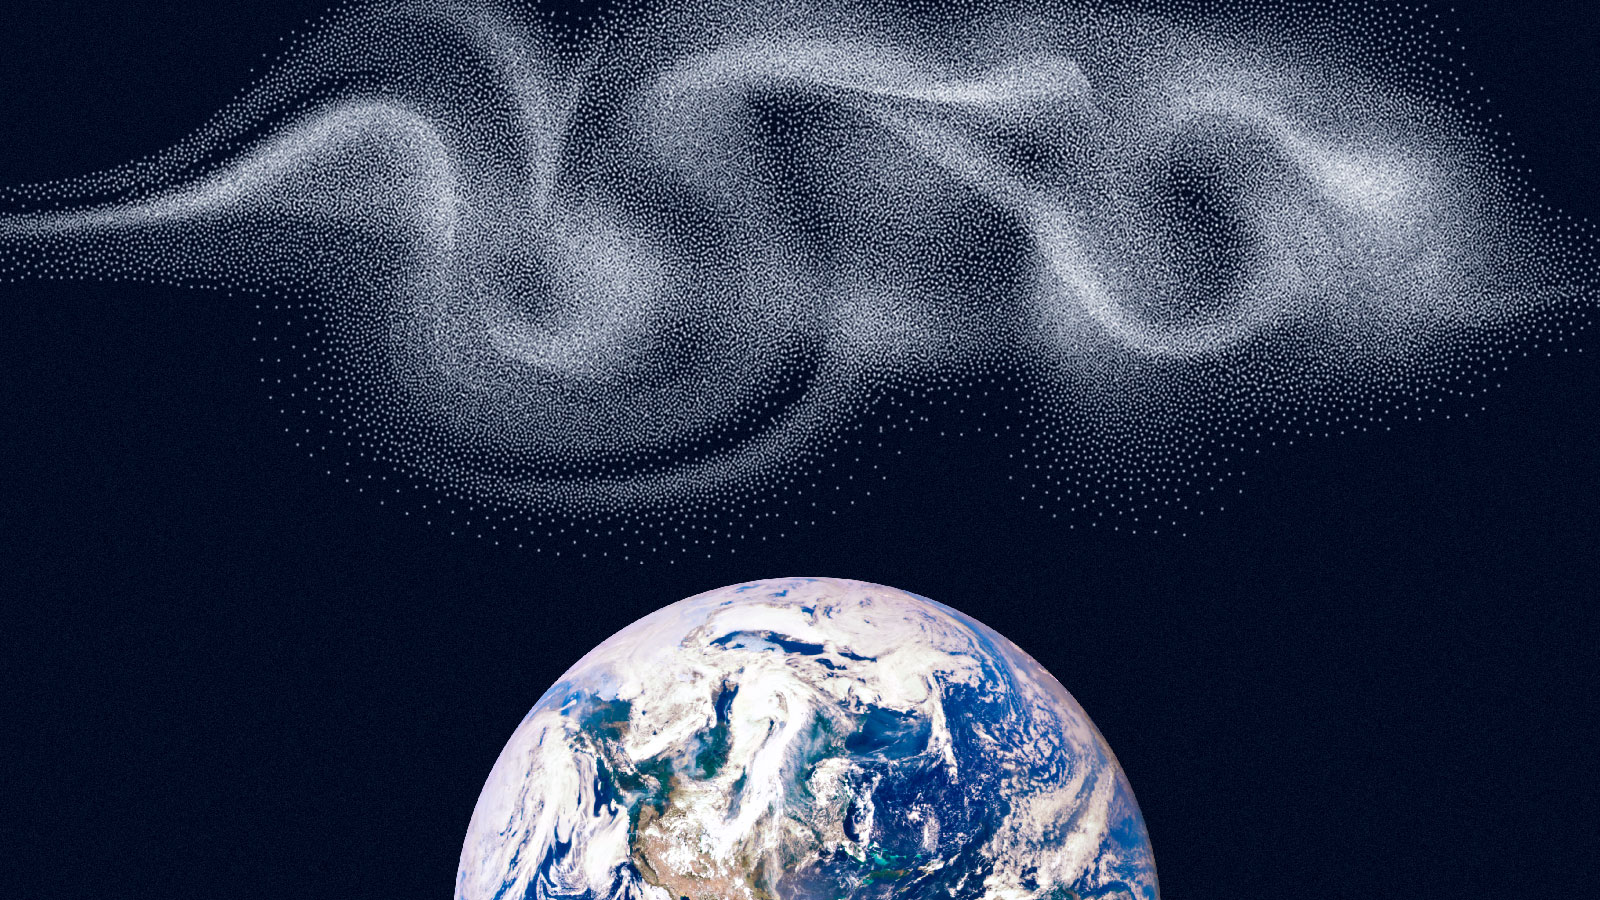 White particles in a swirling cloud above the earth on dark blue background